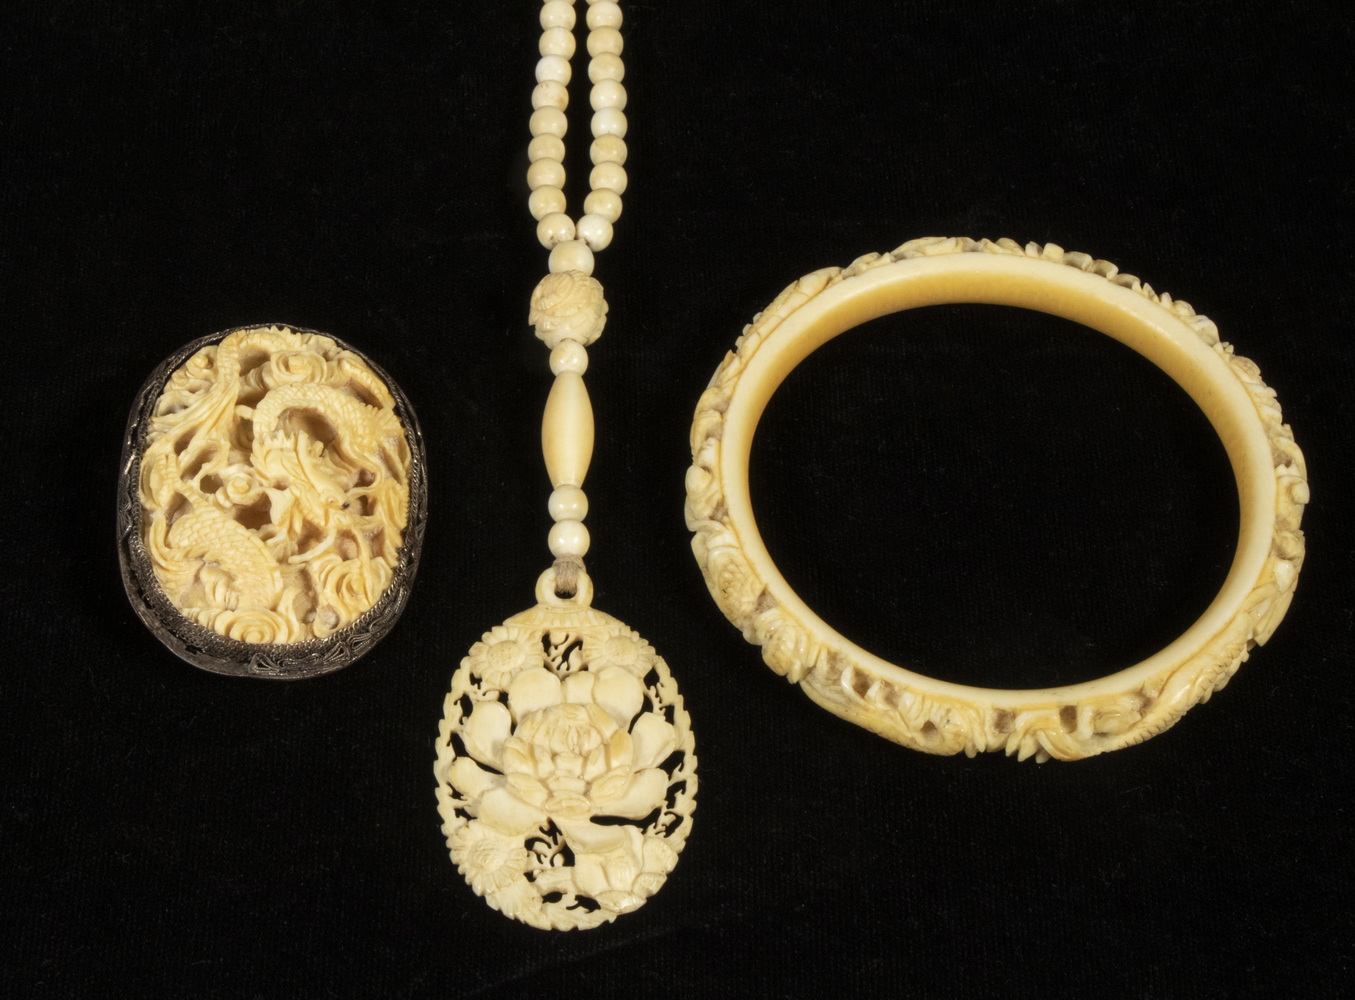 ANTIQUE IVORY JEWELRY Lot of (3) Pieces